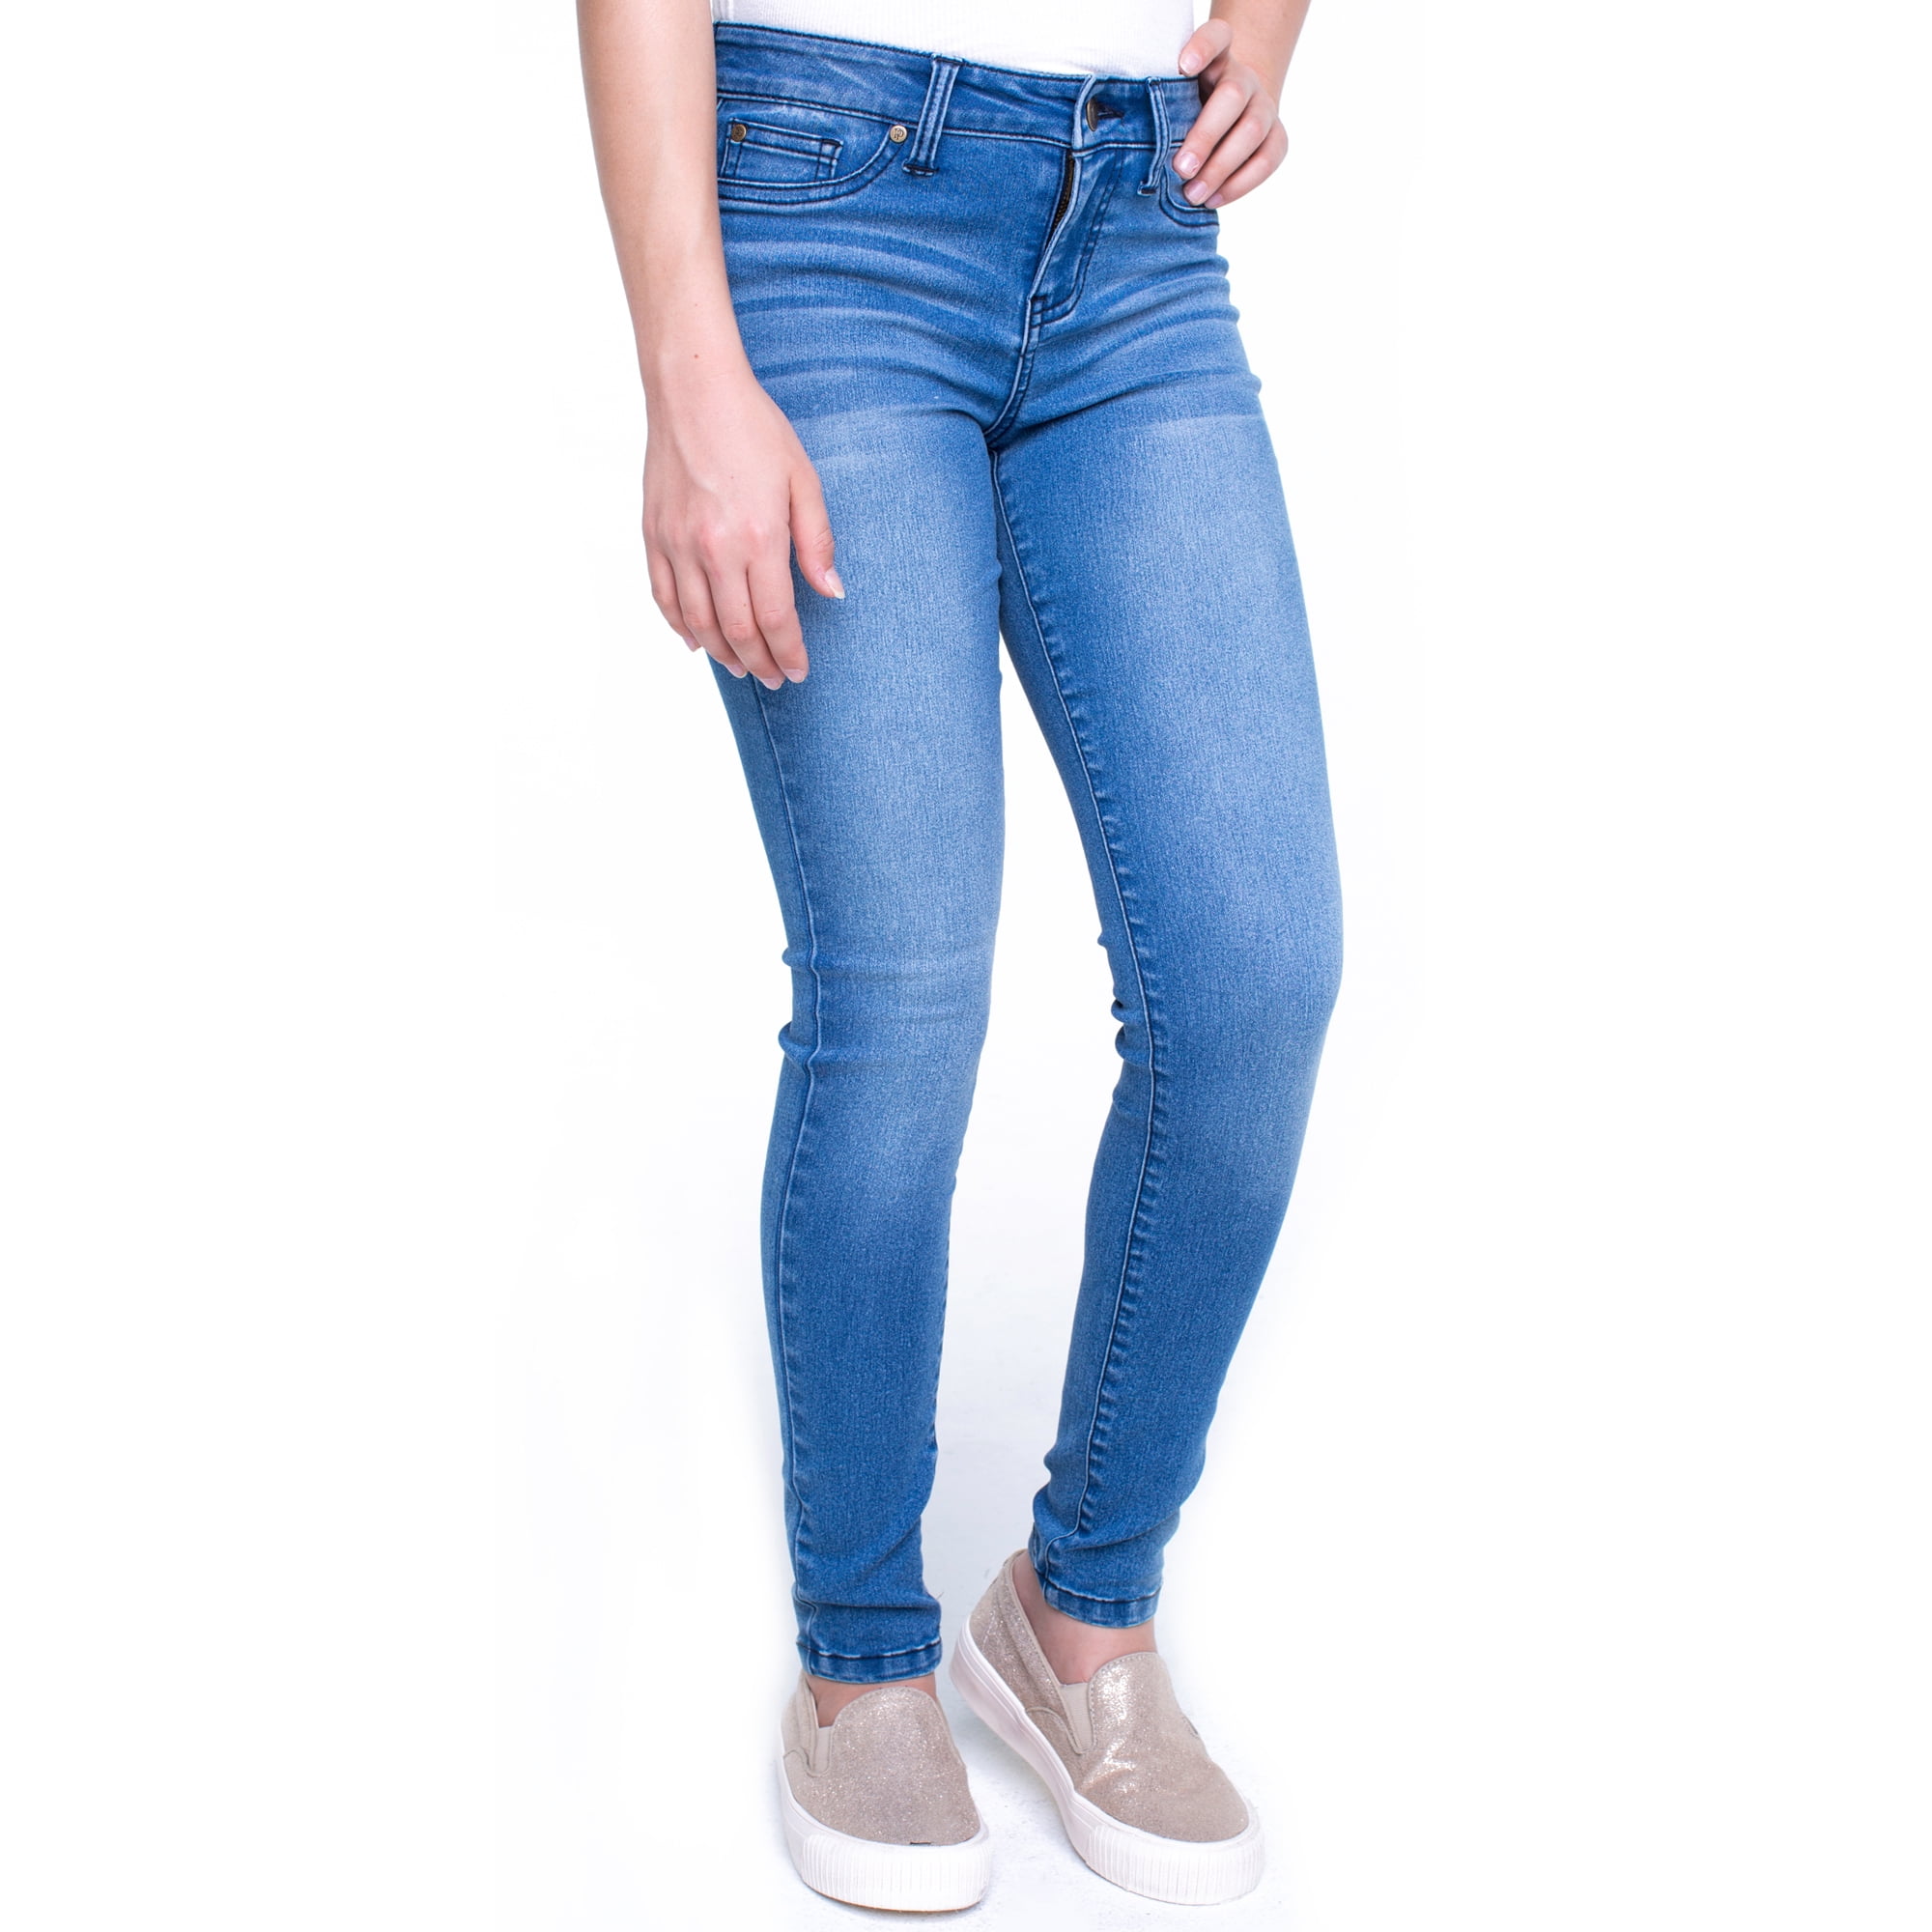 momokrom New Ladies High Waisted Super Skinny Stretchy Ankle Tube Jeans Jeggings UK Size 6-16